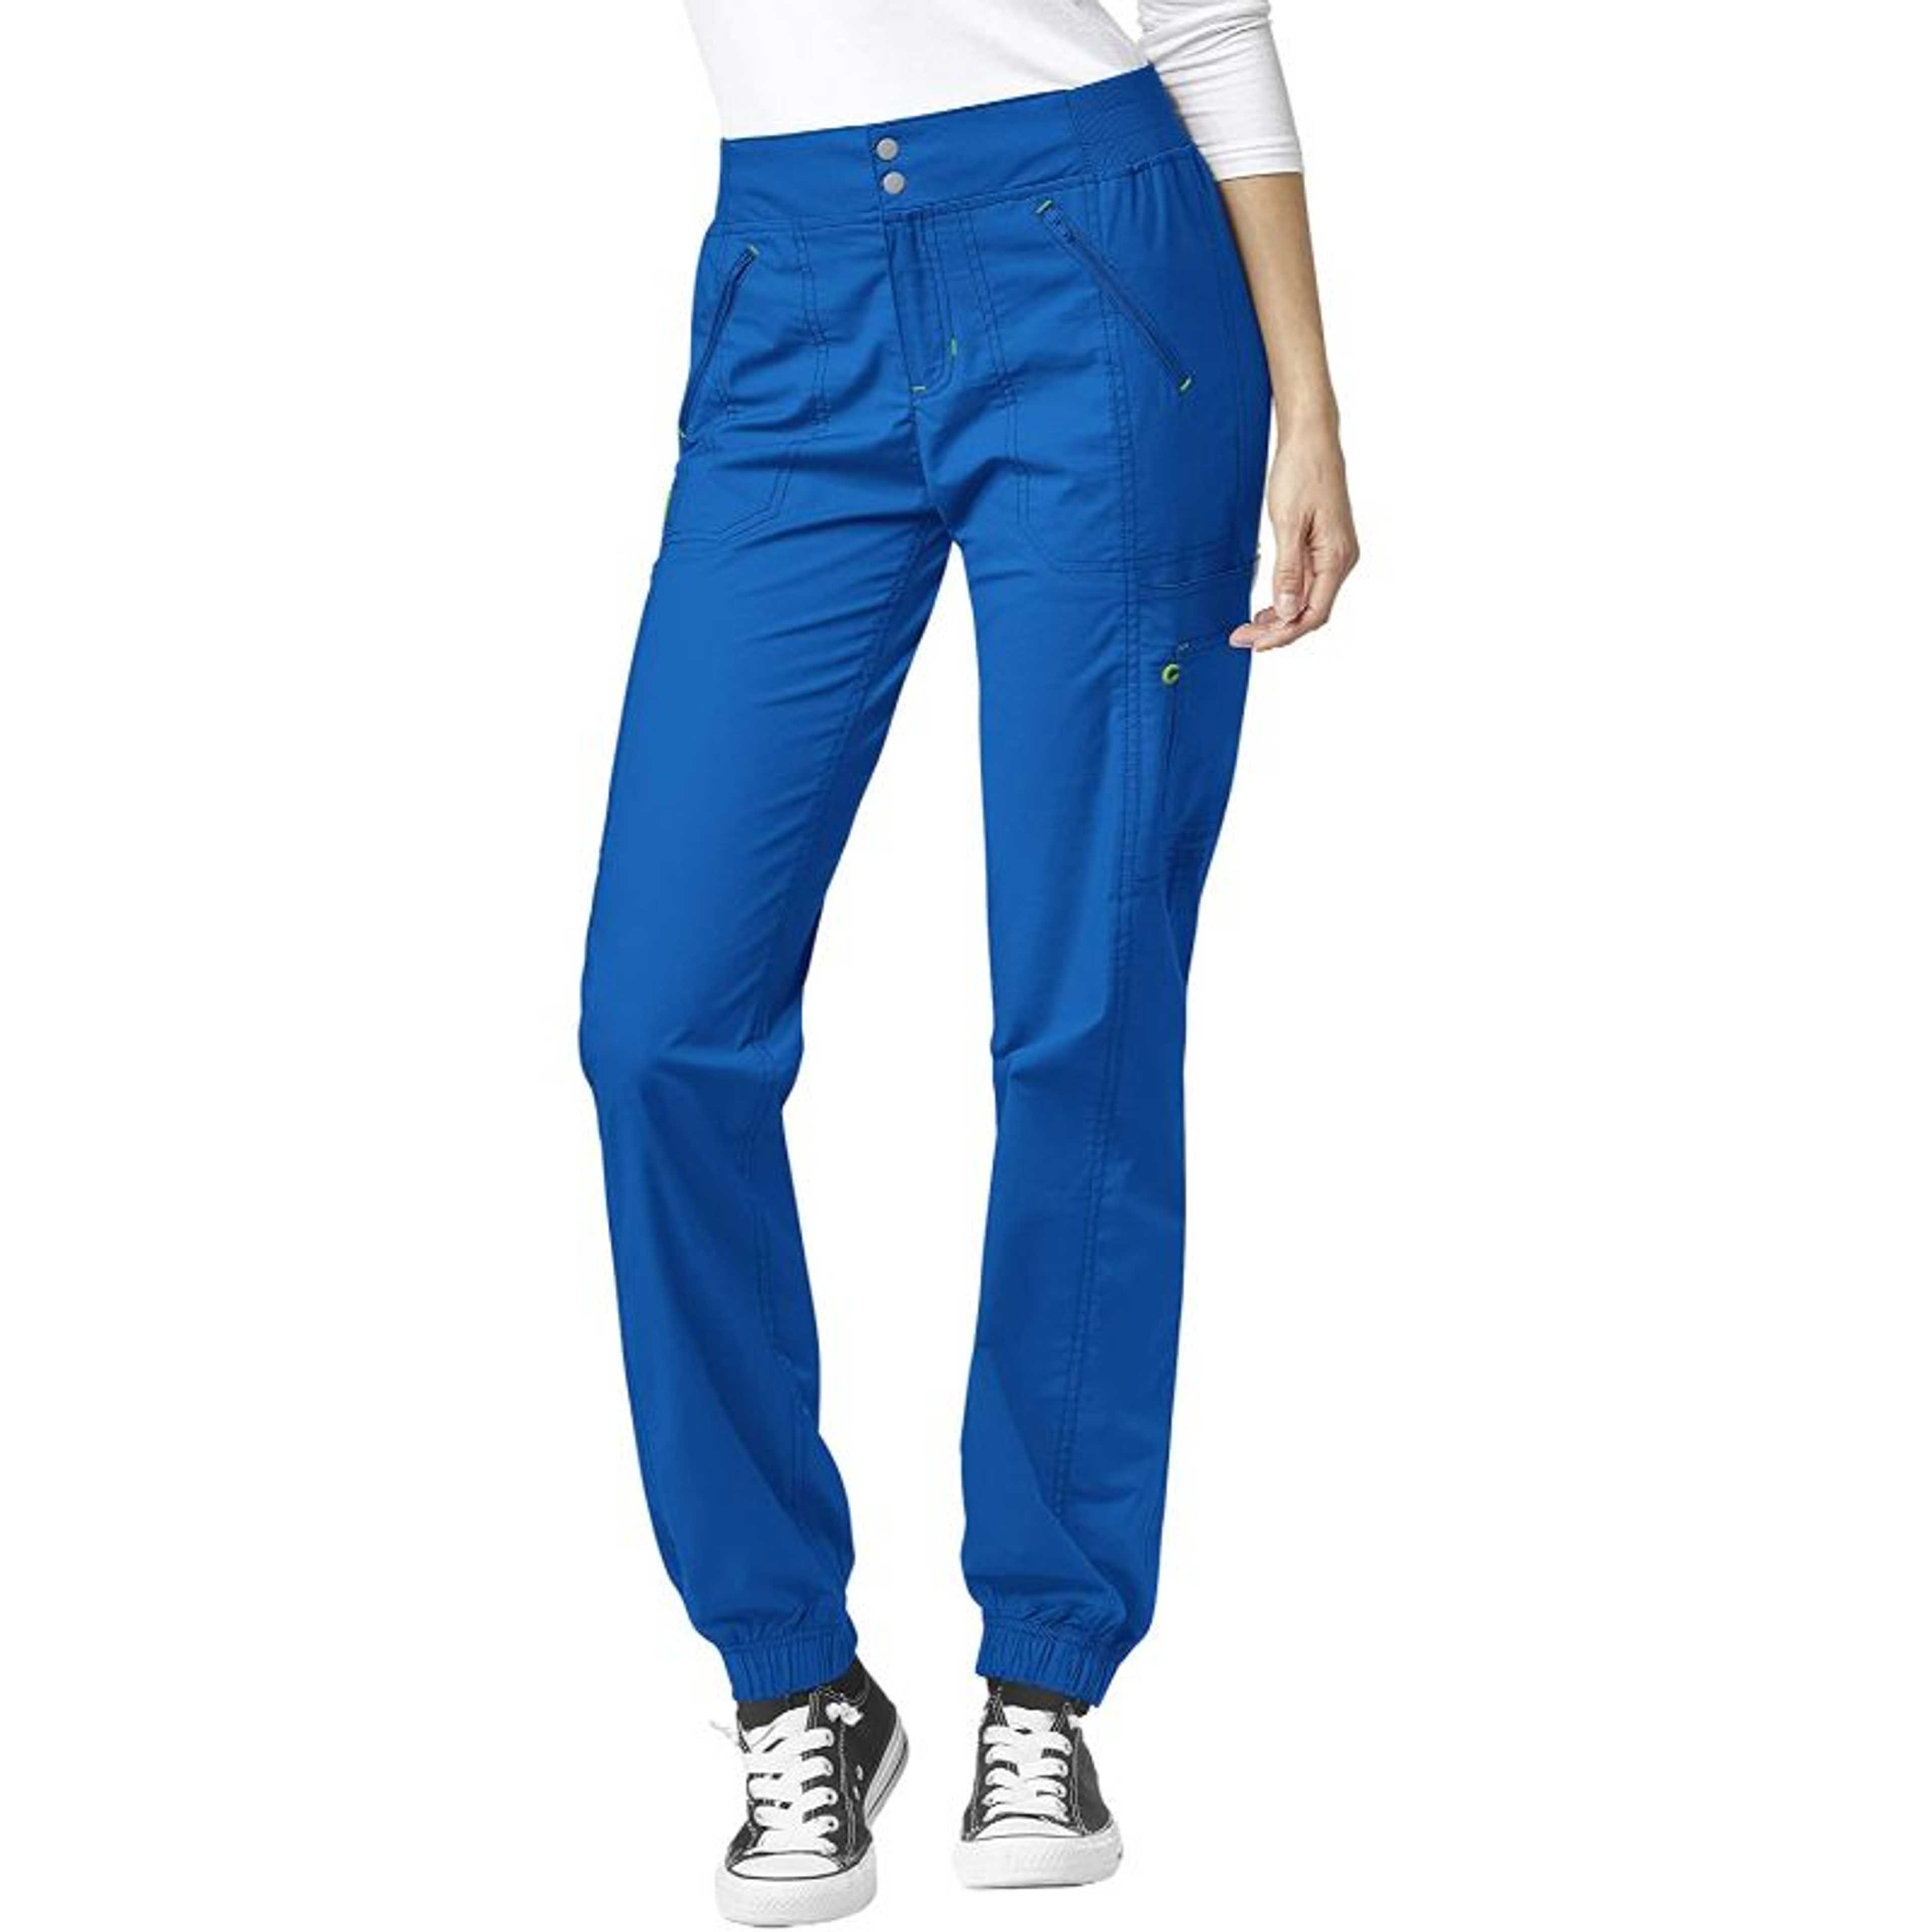 Carribean Blue Rubahas Womens Cargo Trousers Ladies Trousers Jeans Pants